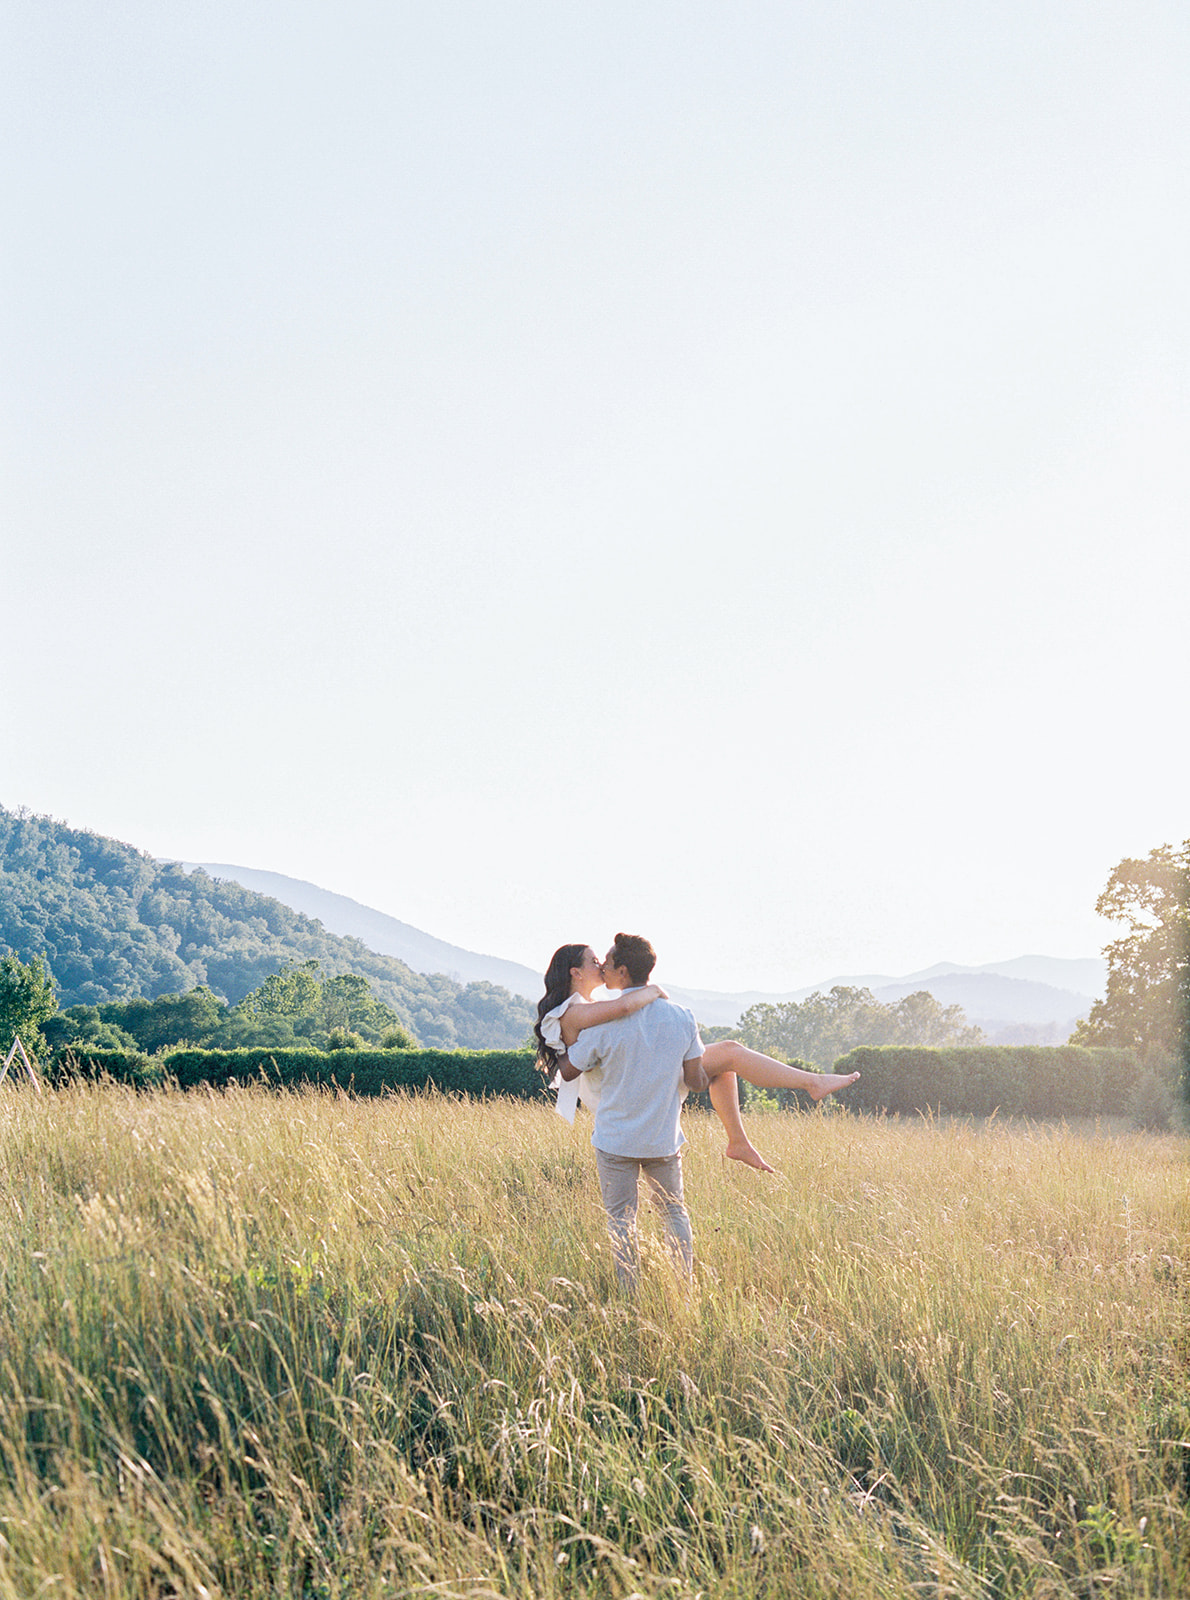 Summer Engagement Session at Big Spring Farm in Lexington by Virginia Wedding photographer Natalie Jayne Photography